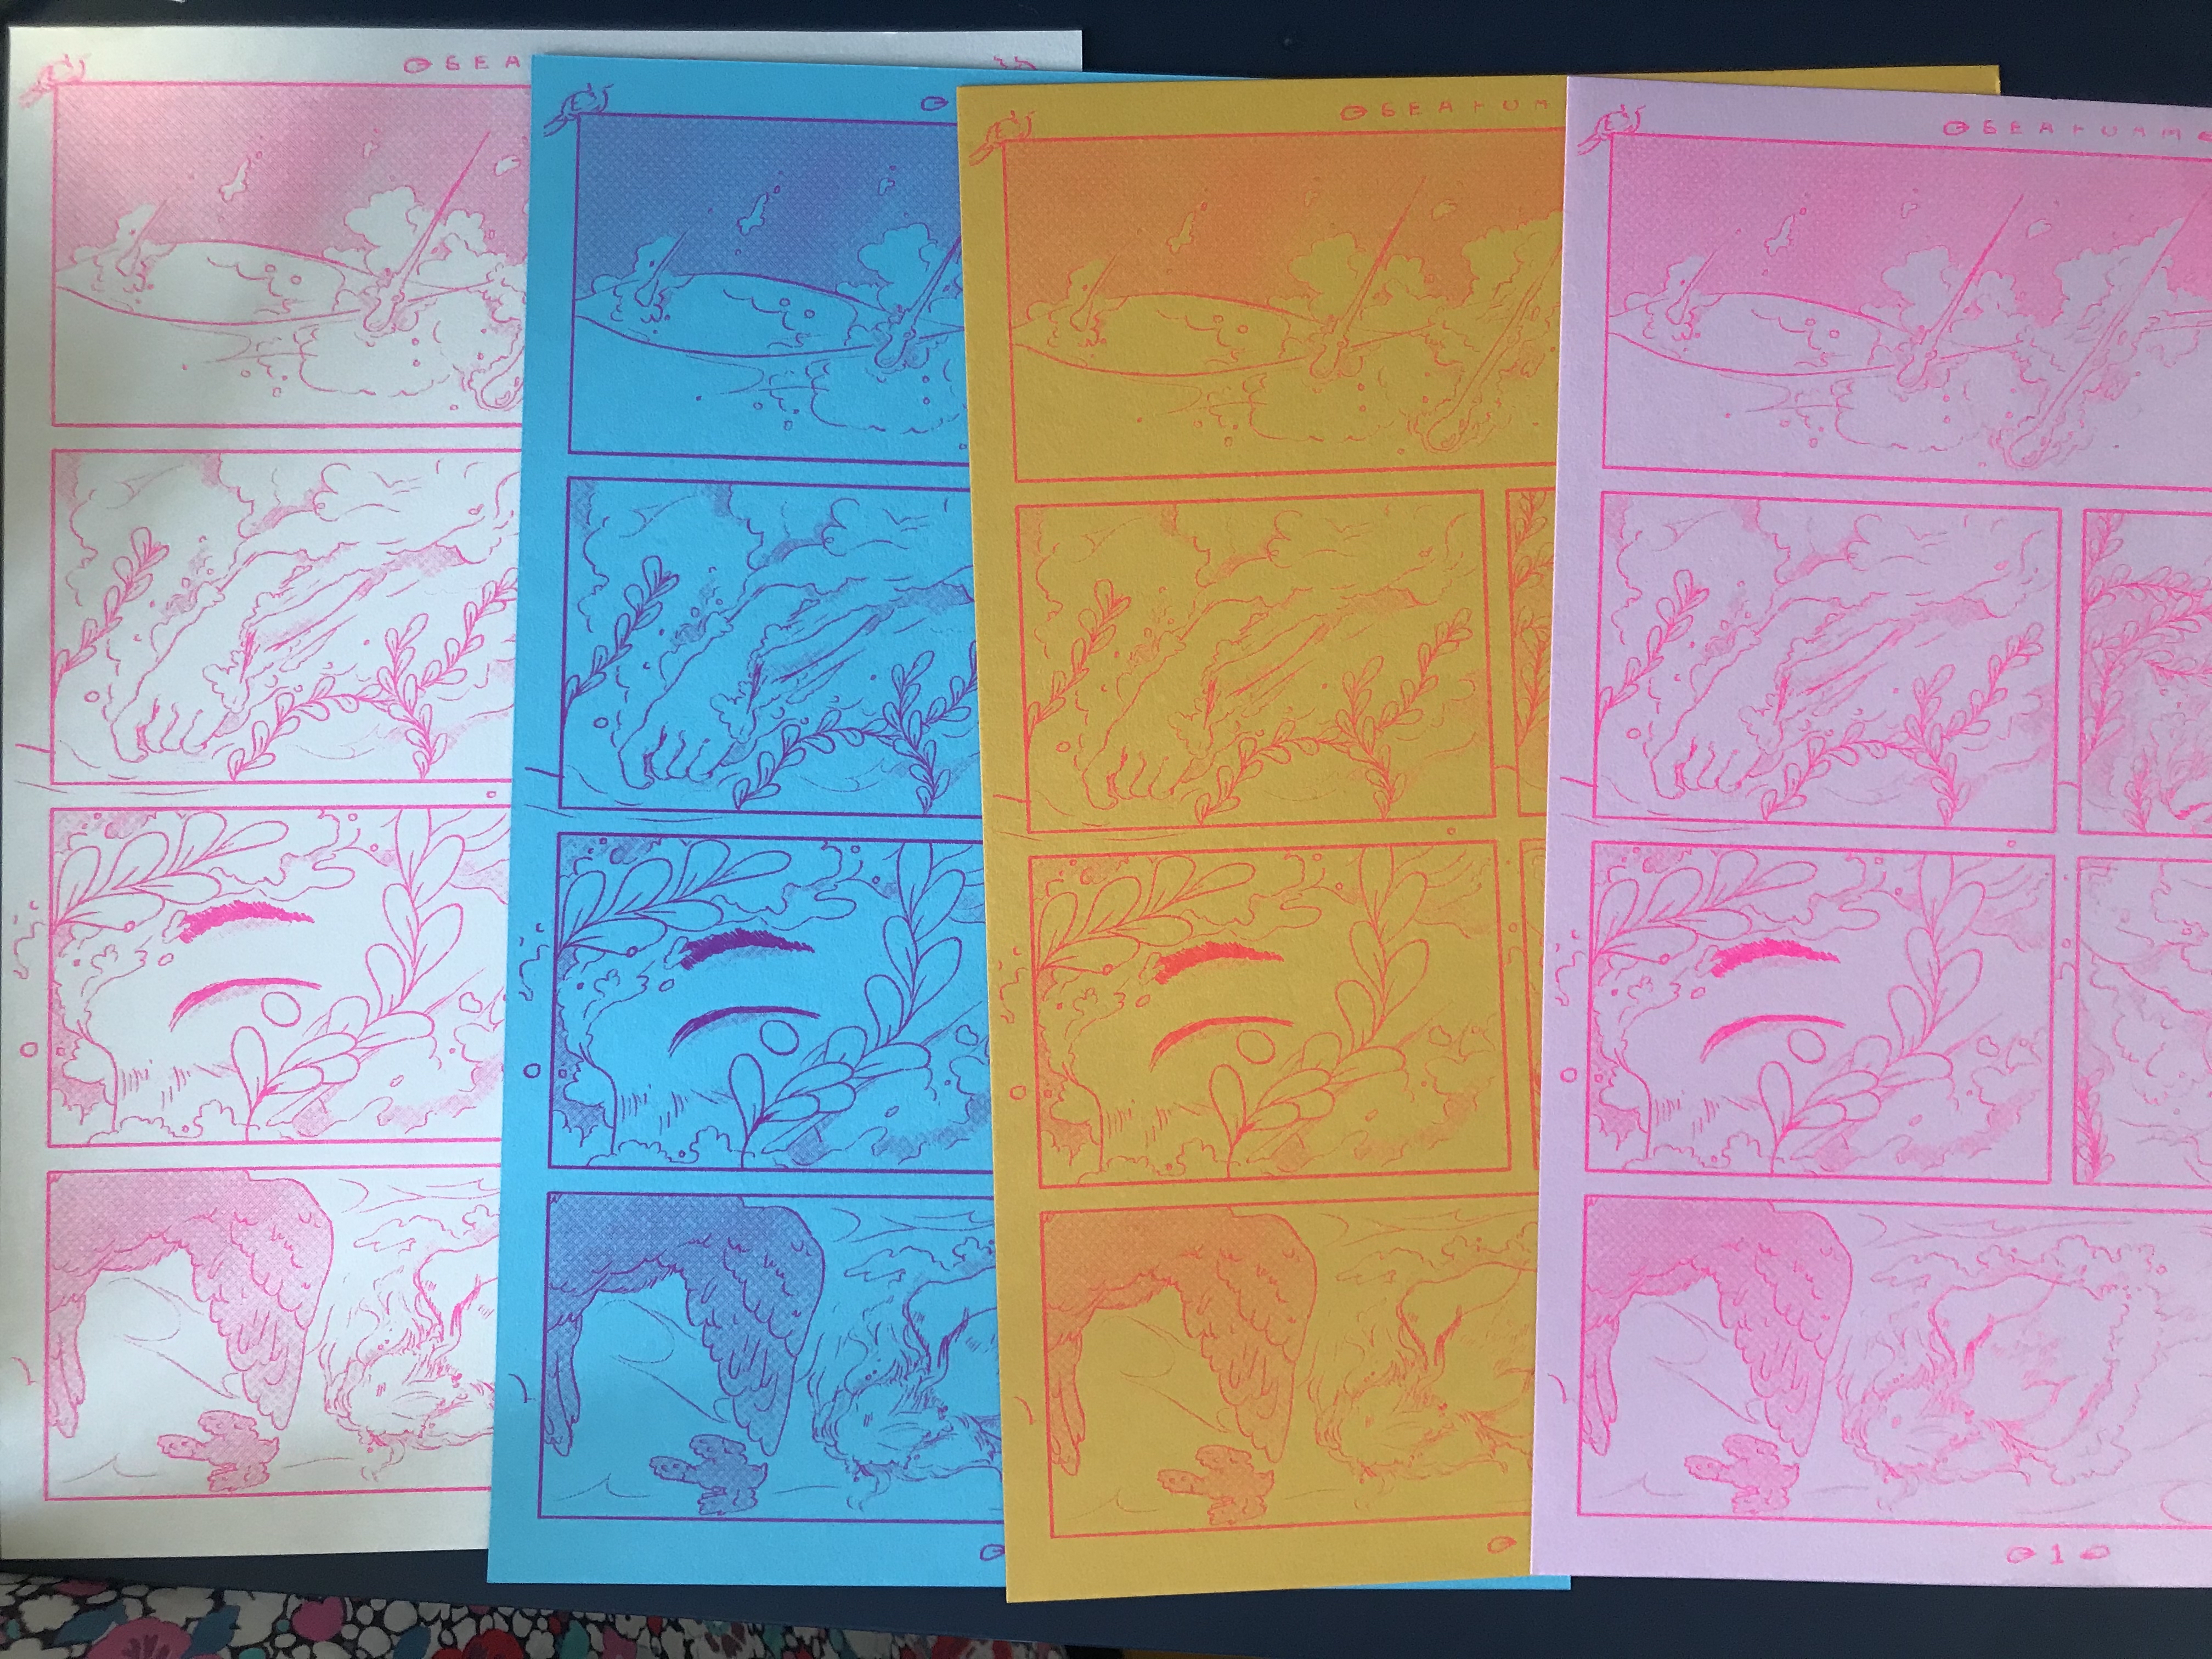 Four riso prints in different colours of the same comic page, depicting a woman falling from earth into the sea, but only half of the page is visible. left to right, the colours are pink on white, purple on blue, red on yellow, and pink on paler pink.